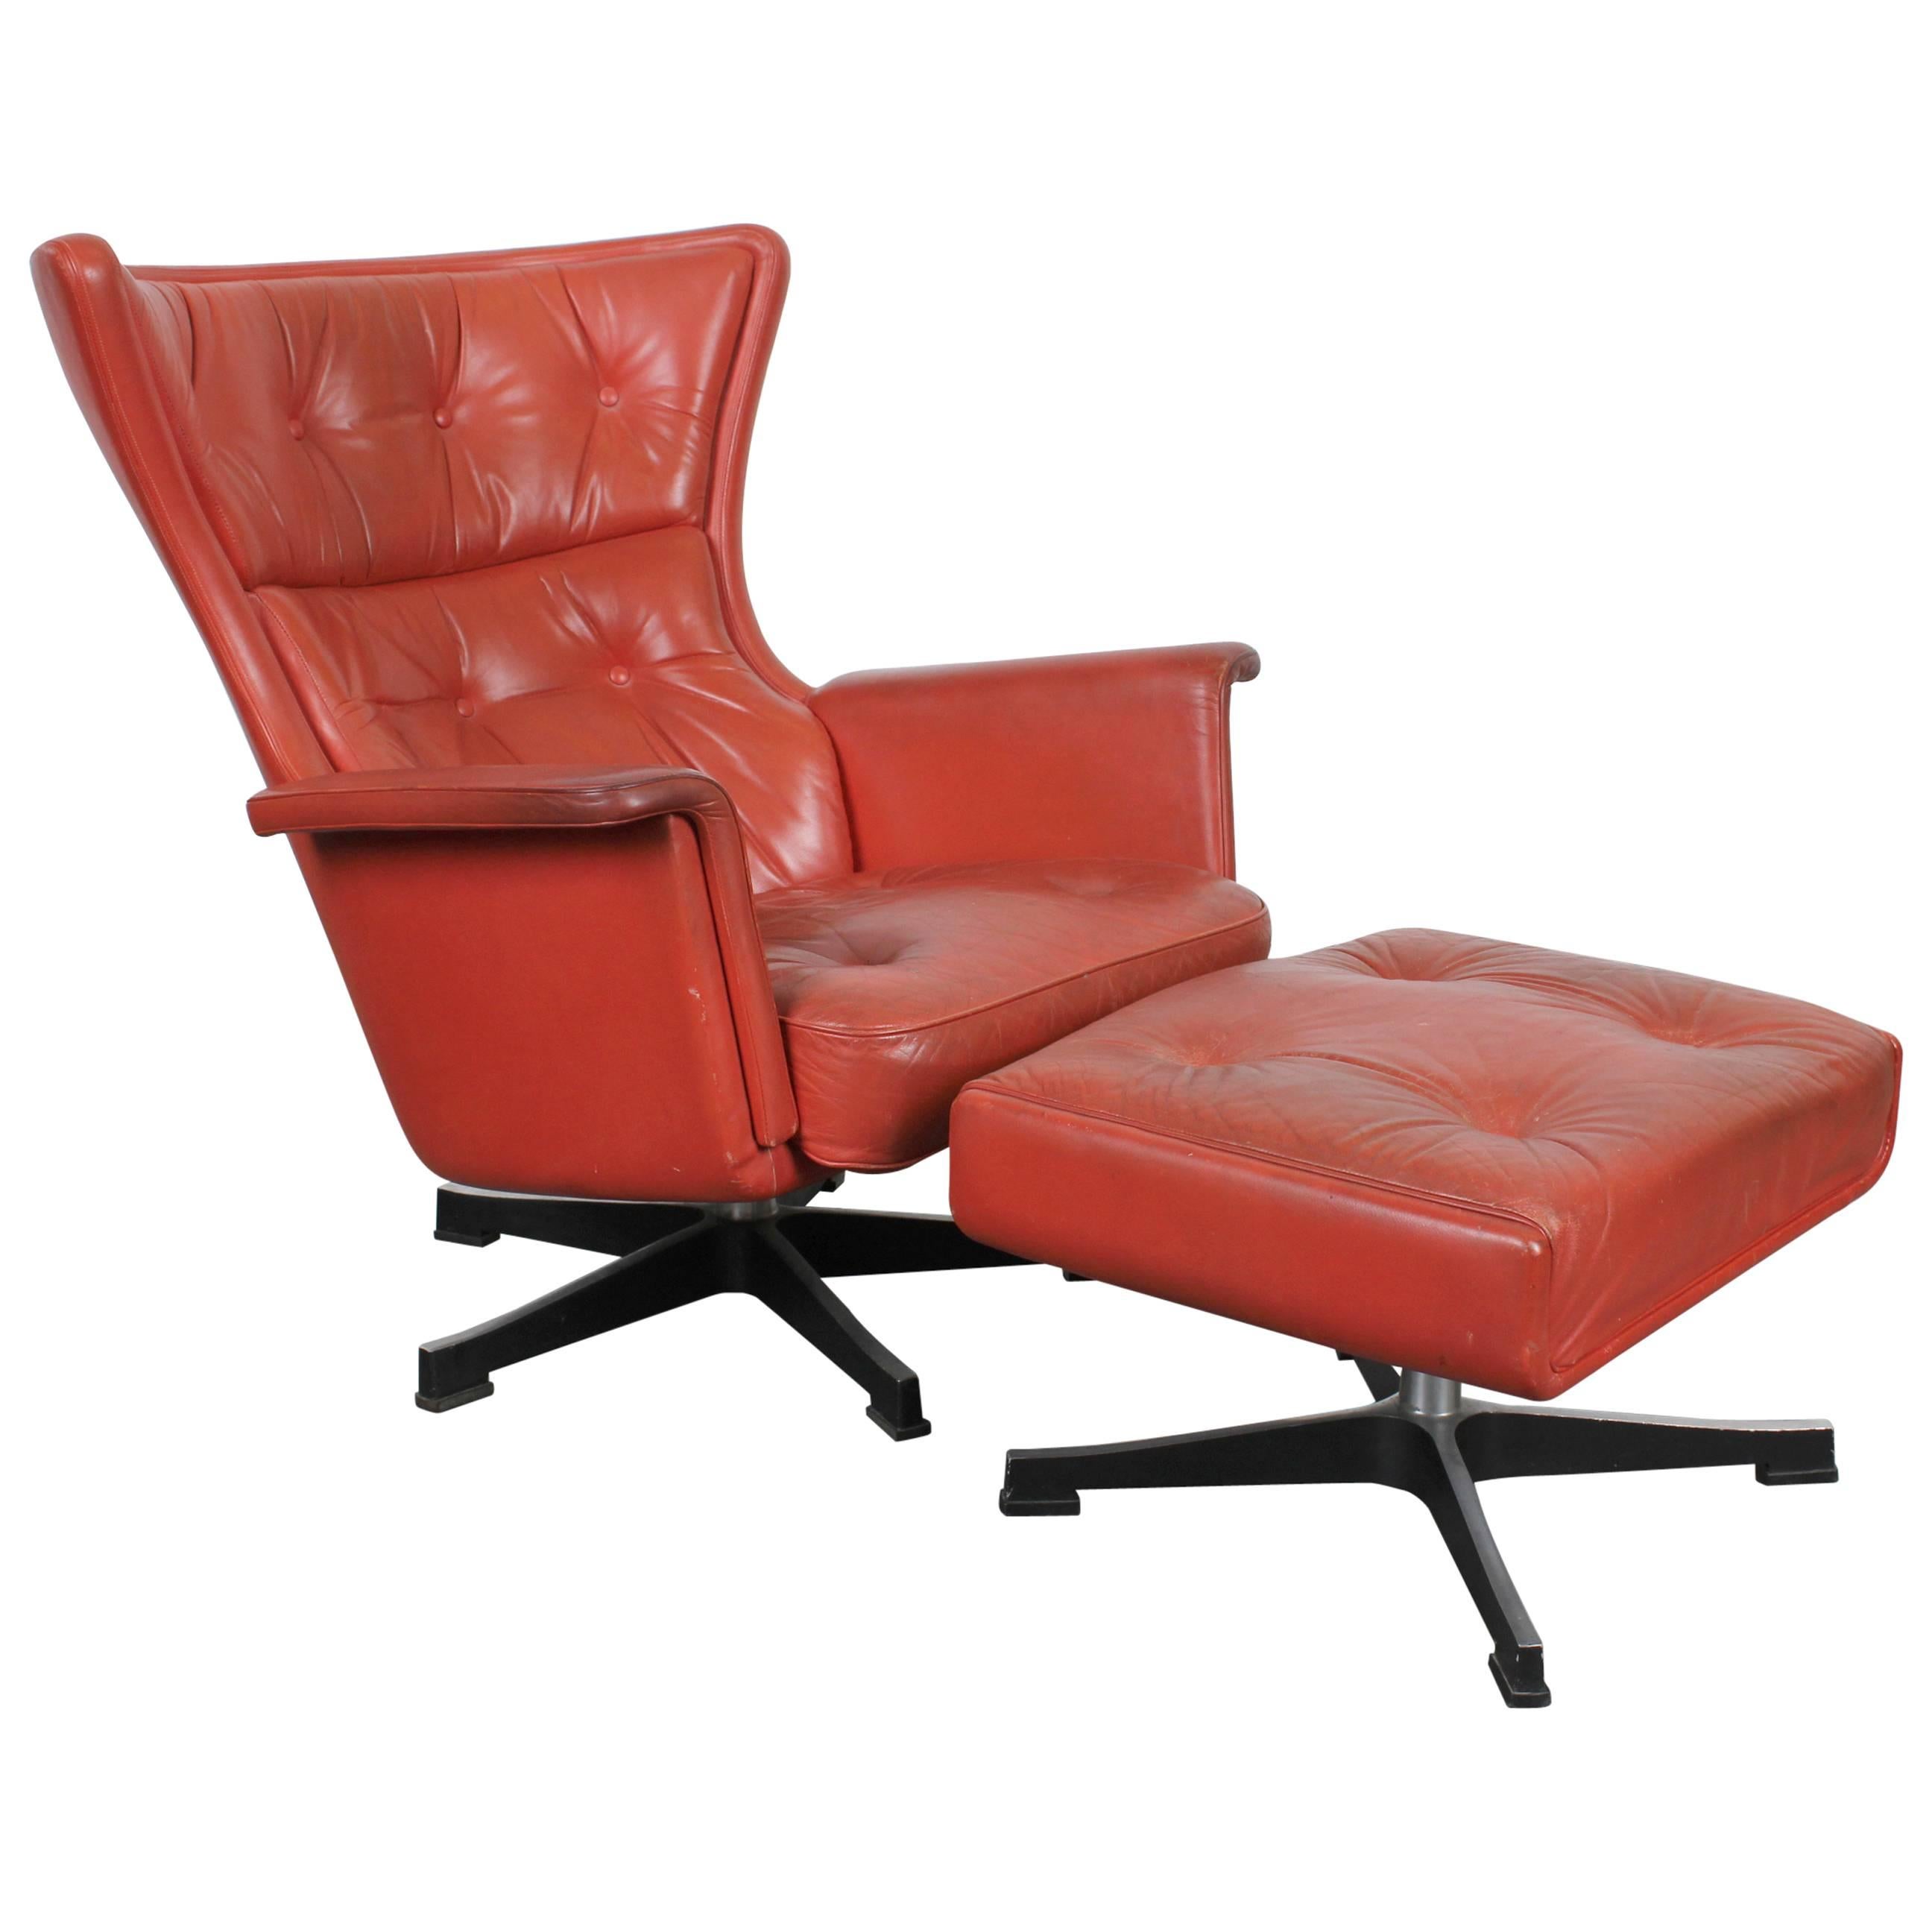 Mid-Century Modern Red Leather Swivel Chair